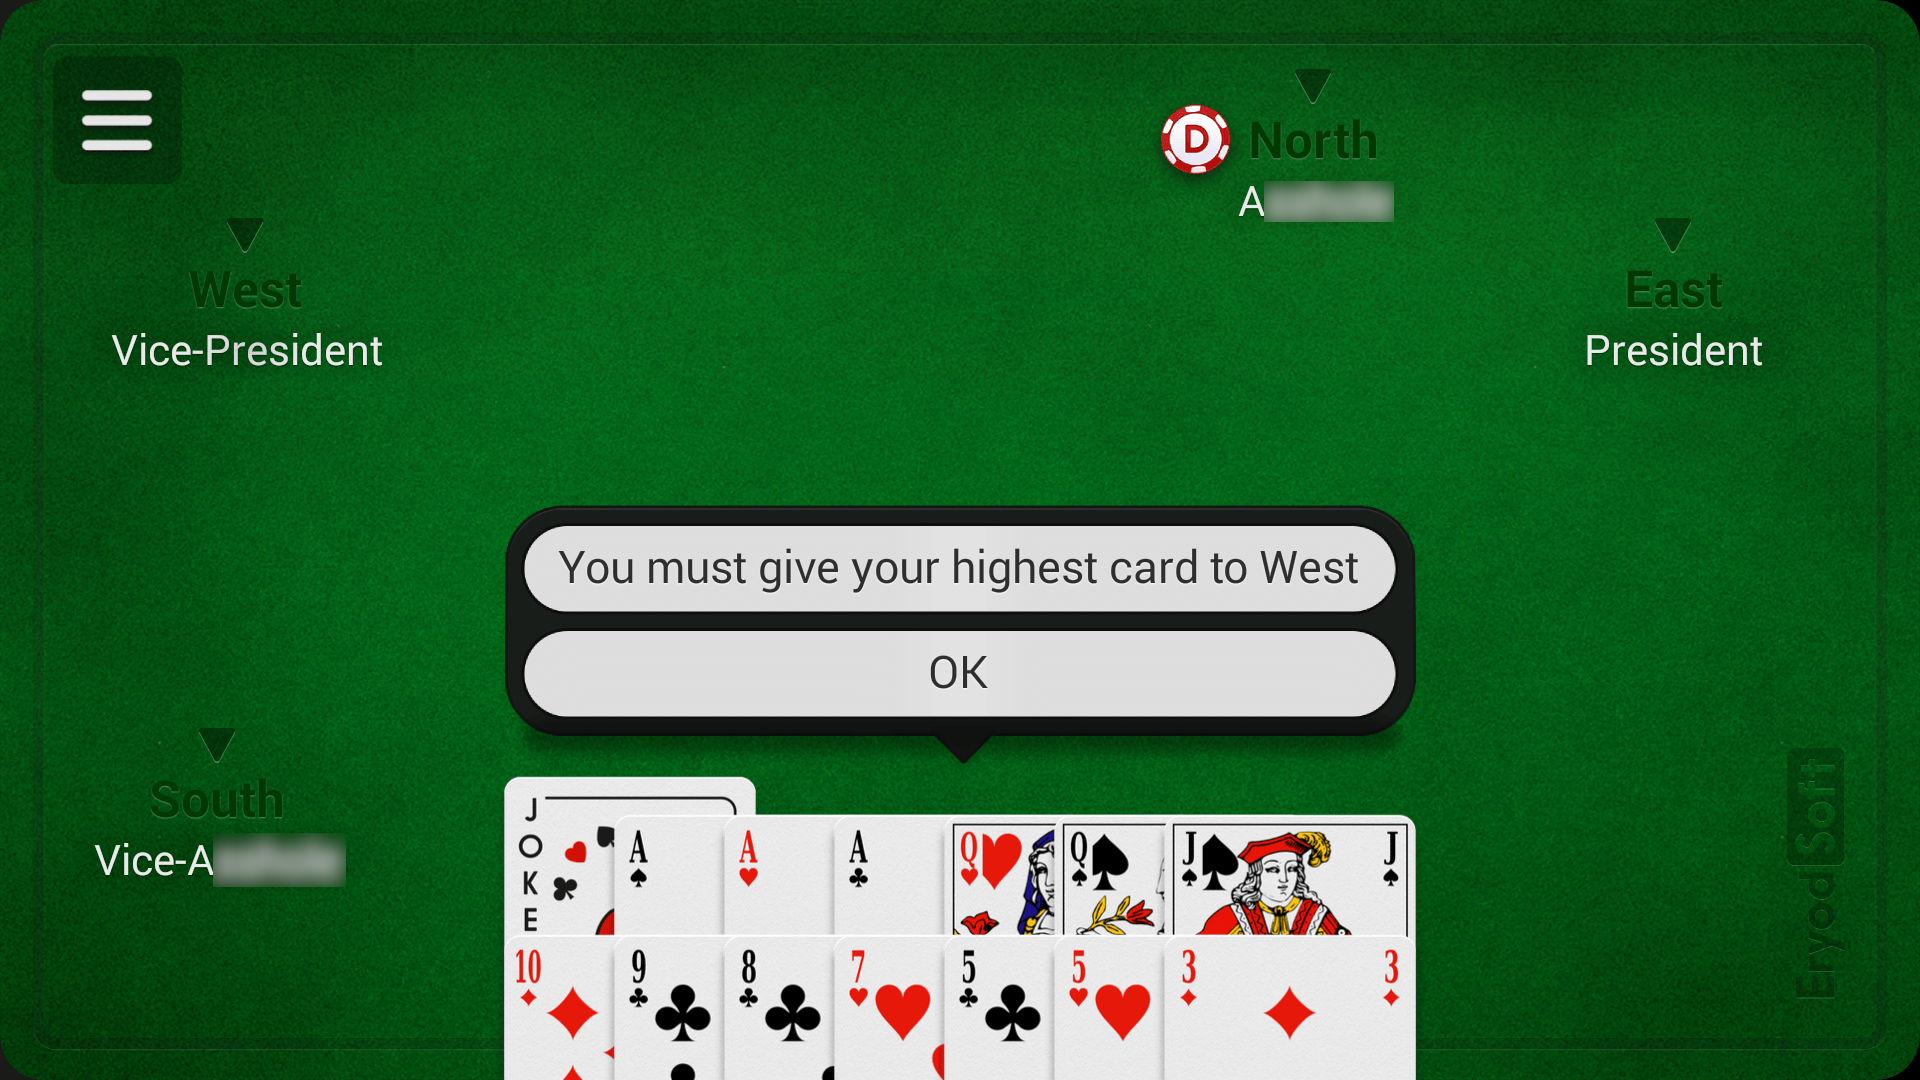 Android application President - Card Game screenshort